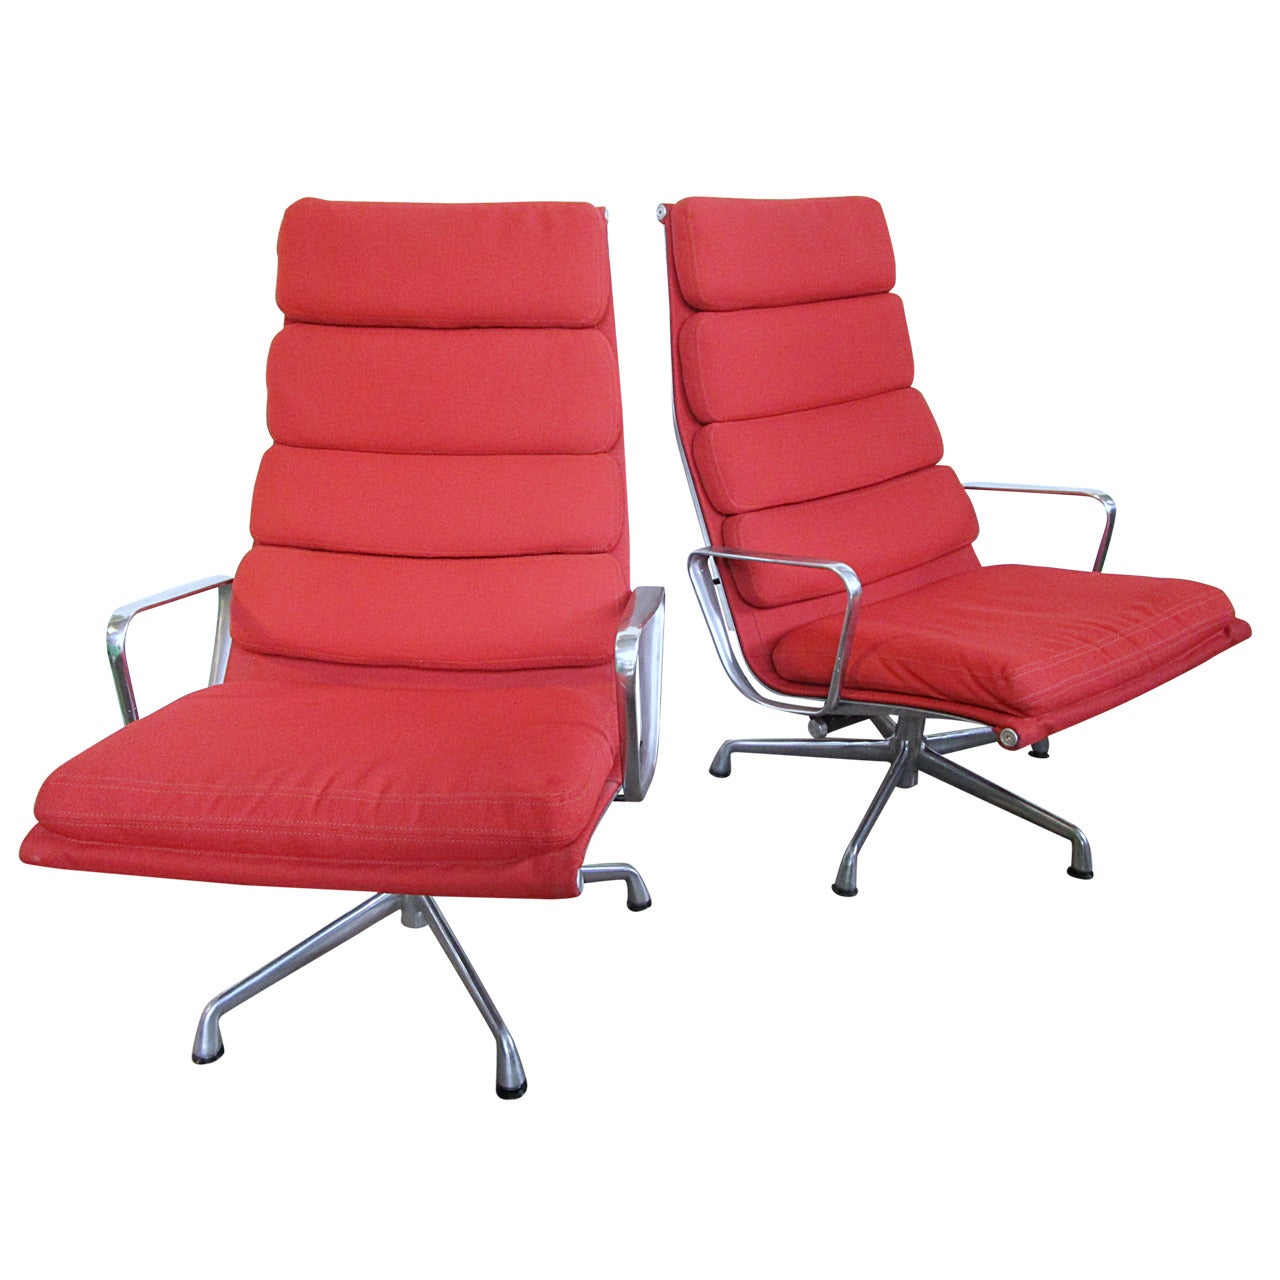 Charles and Ray Eames Soft Pad Executive Chair